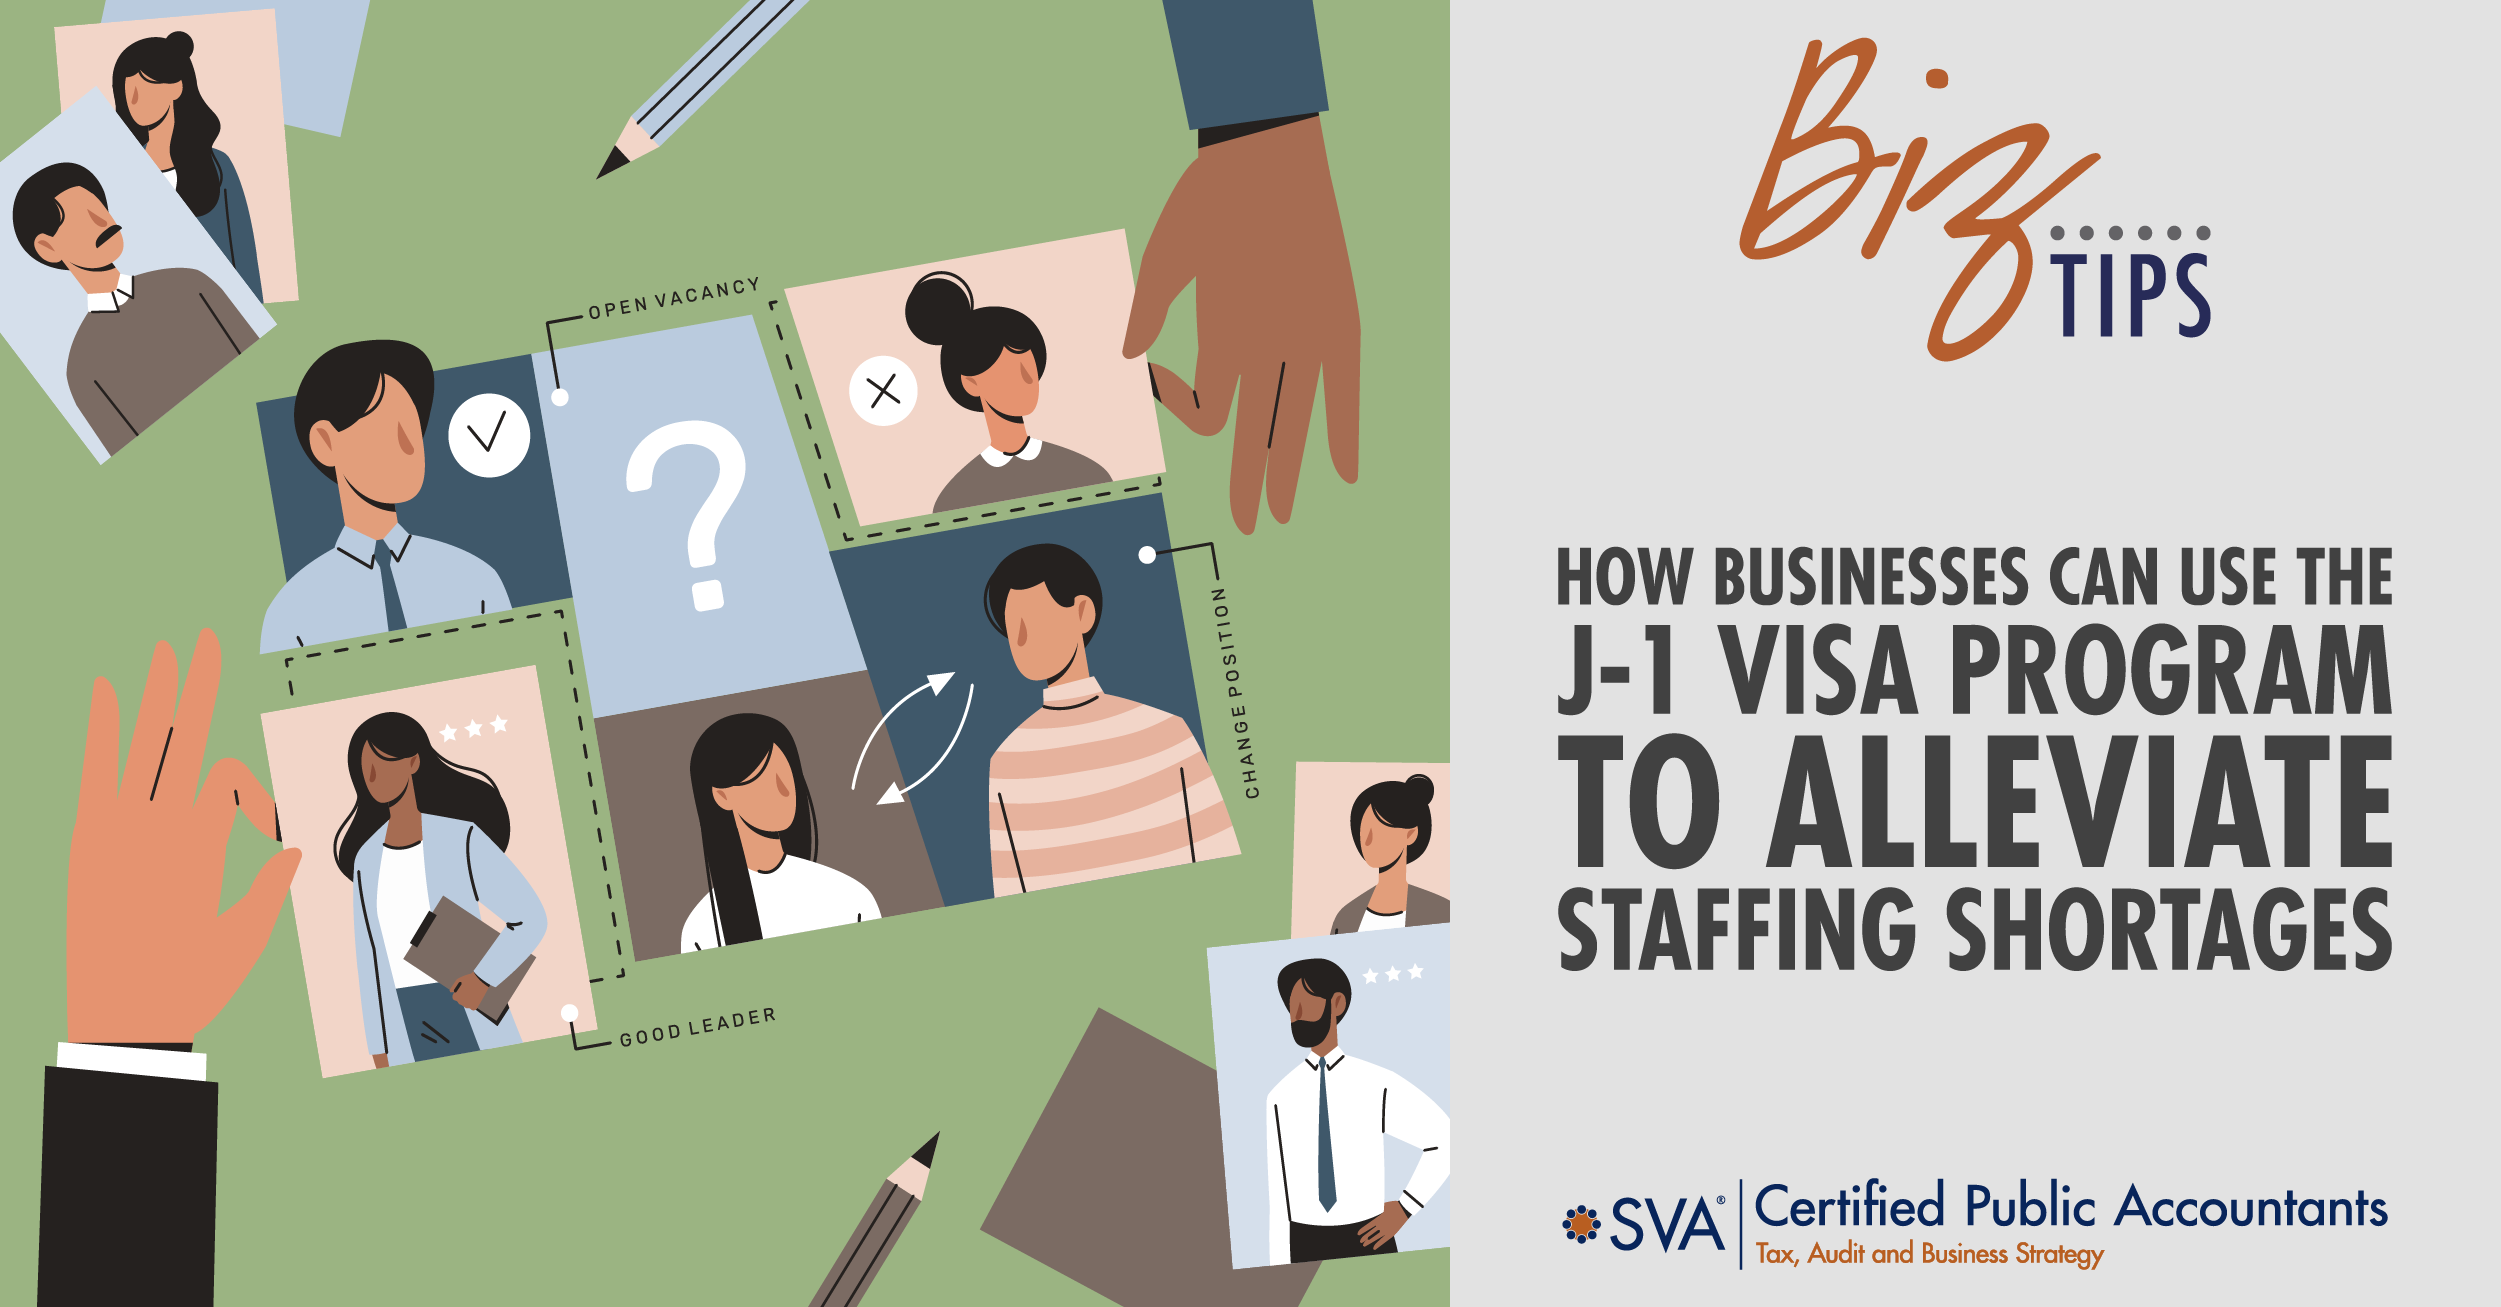 How Businesses Can Use the J-1 Visa Program to Alleviate Staffing Shortages